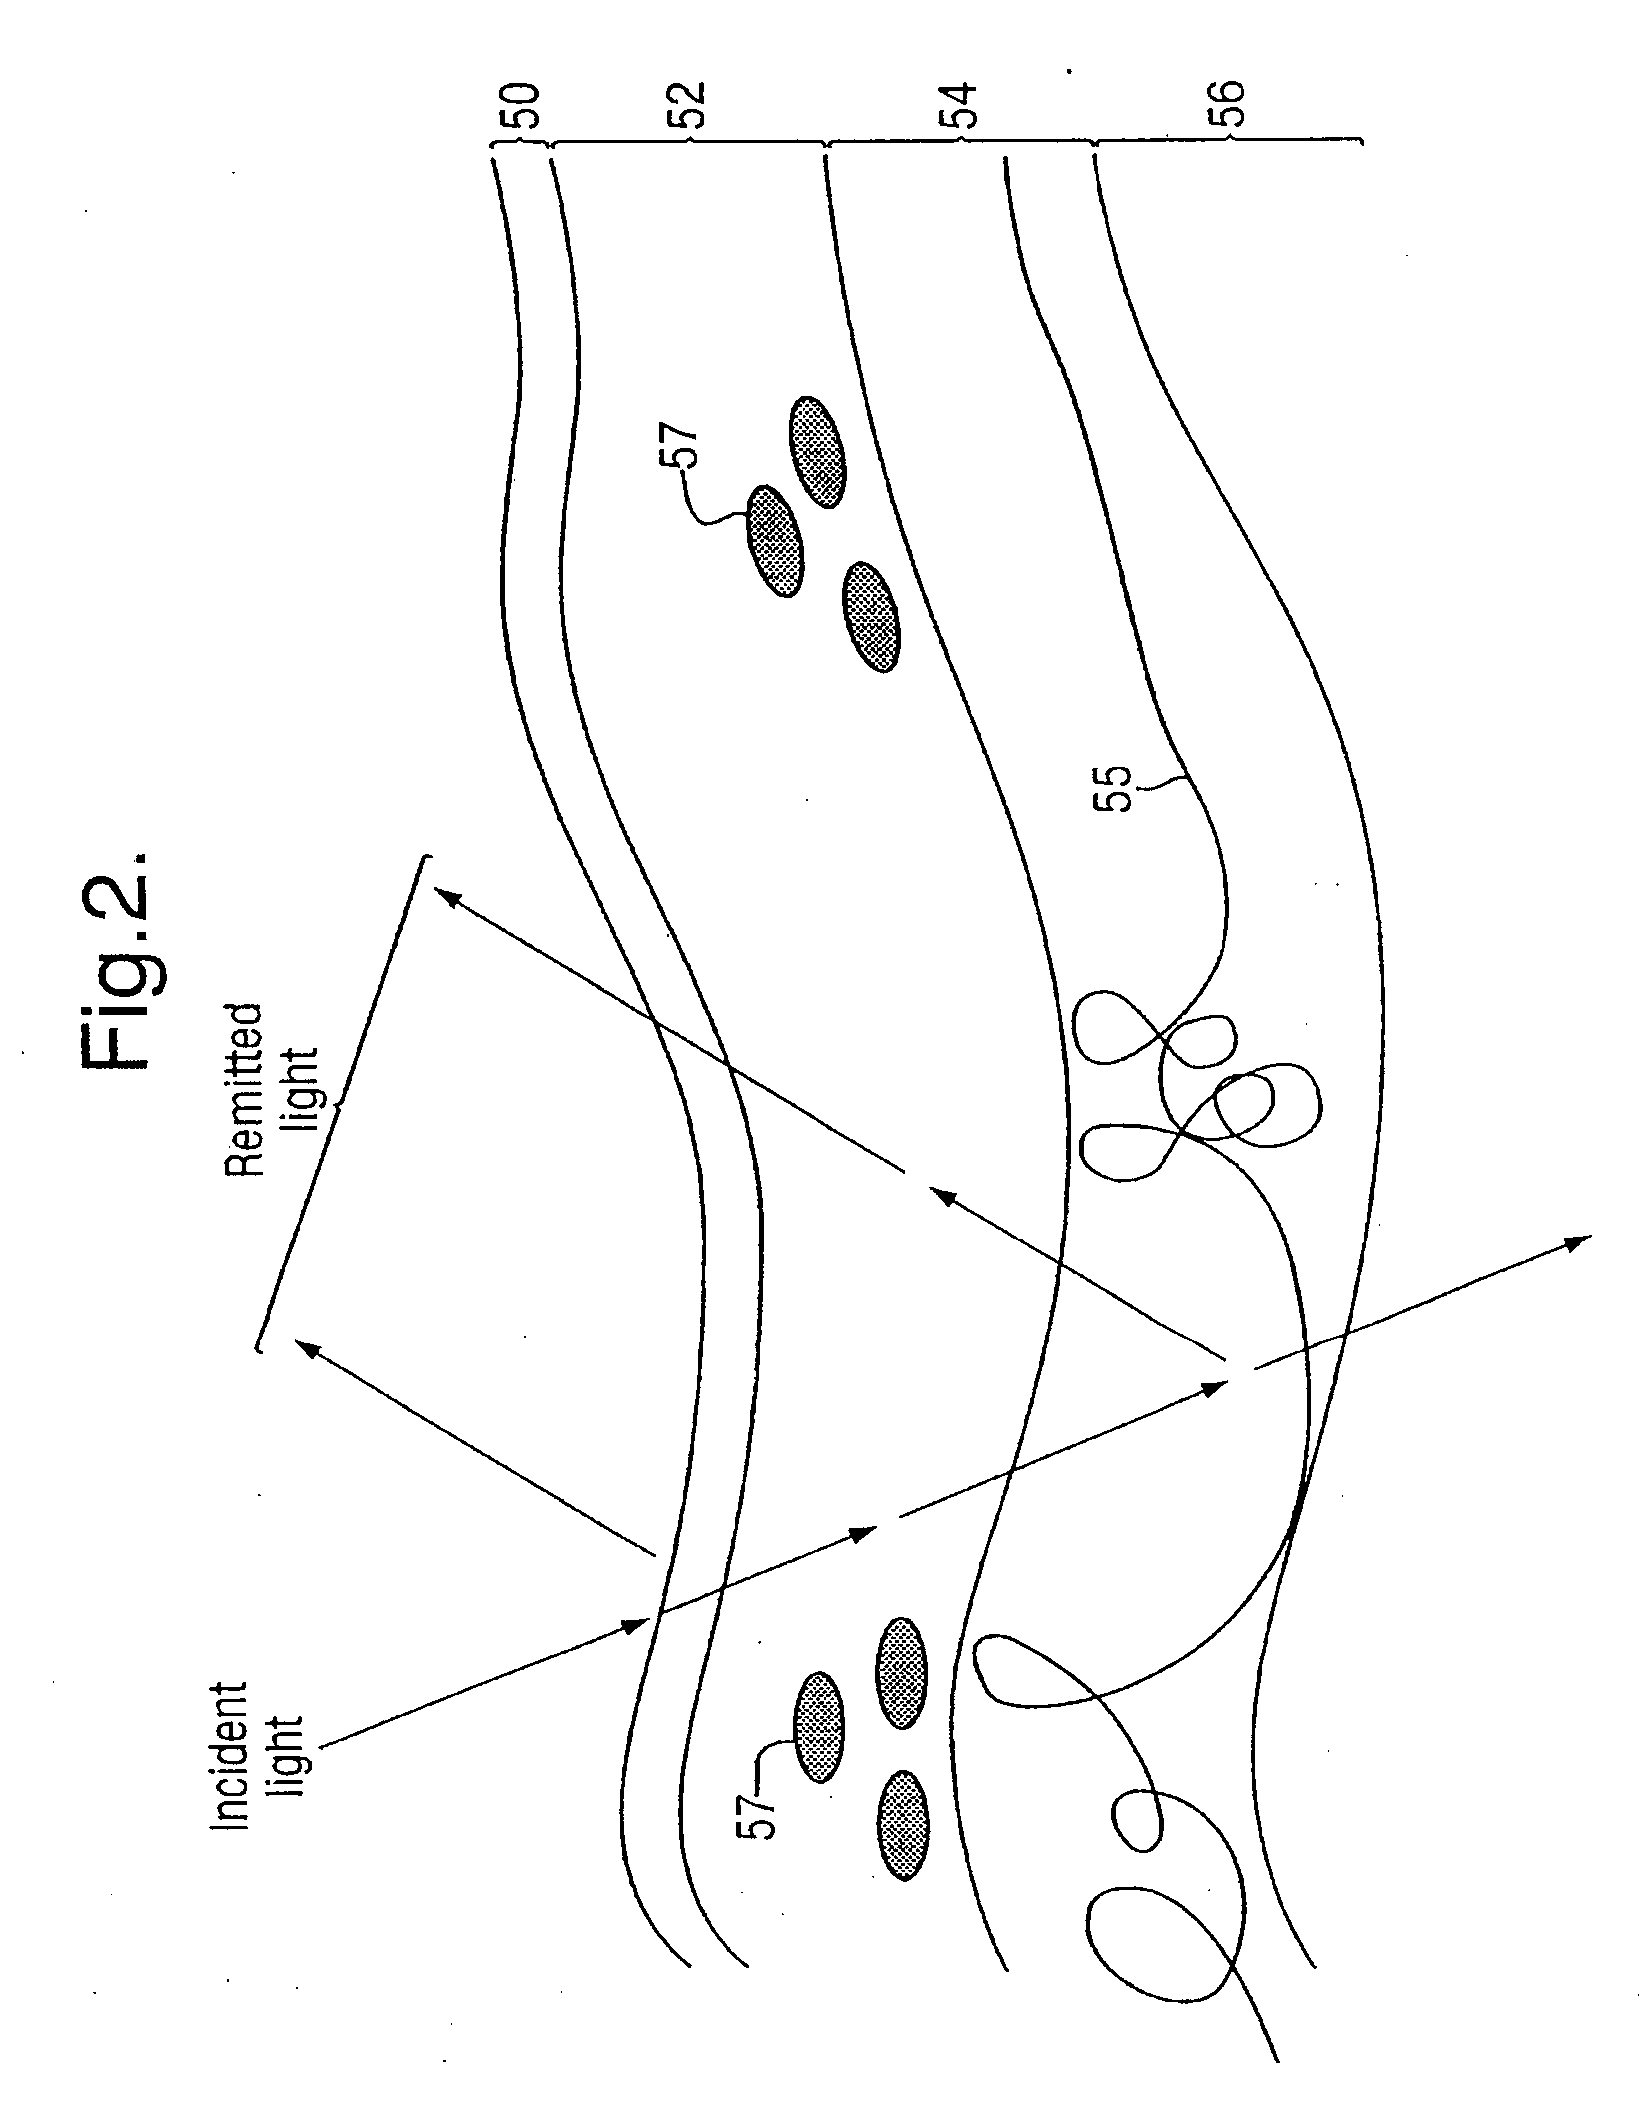 Method and Apparatus for Detecting the Presence of Dermal Melanin in Epithelial Tissue